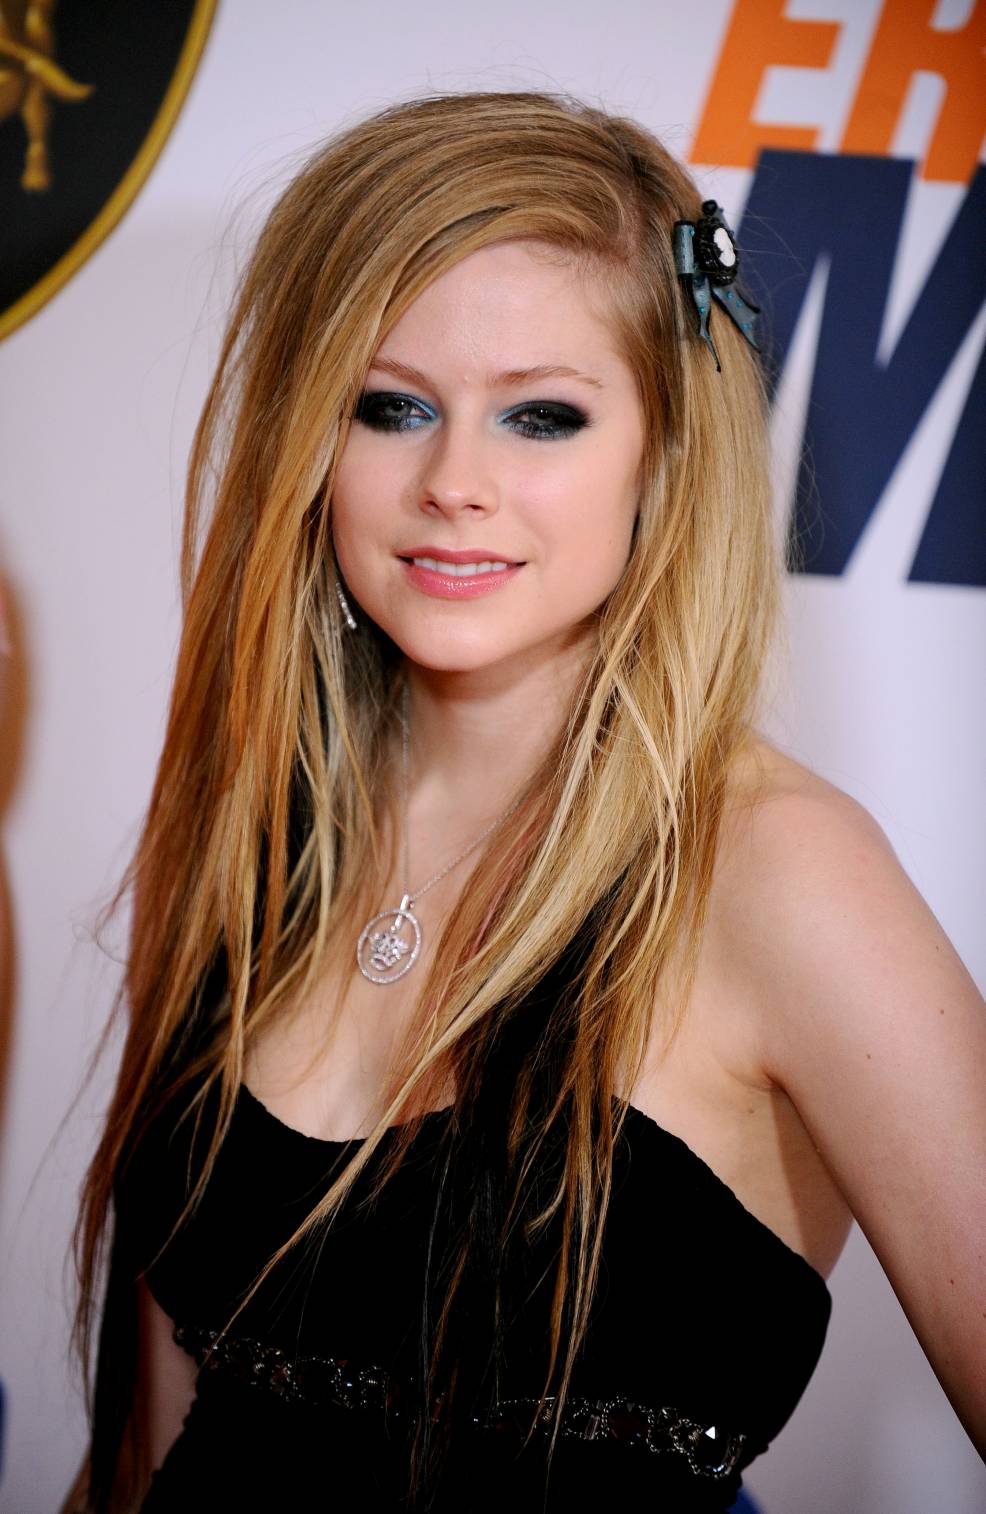 Avril Hairstyles - Avril Lavigne hairstyle Photo (28330923) - Fanpop